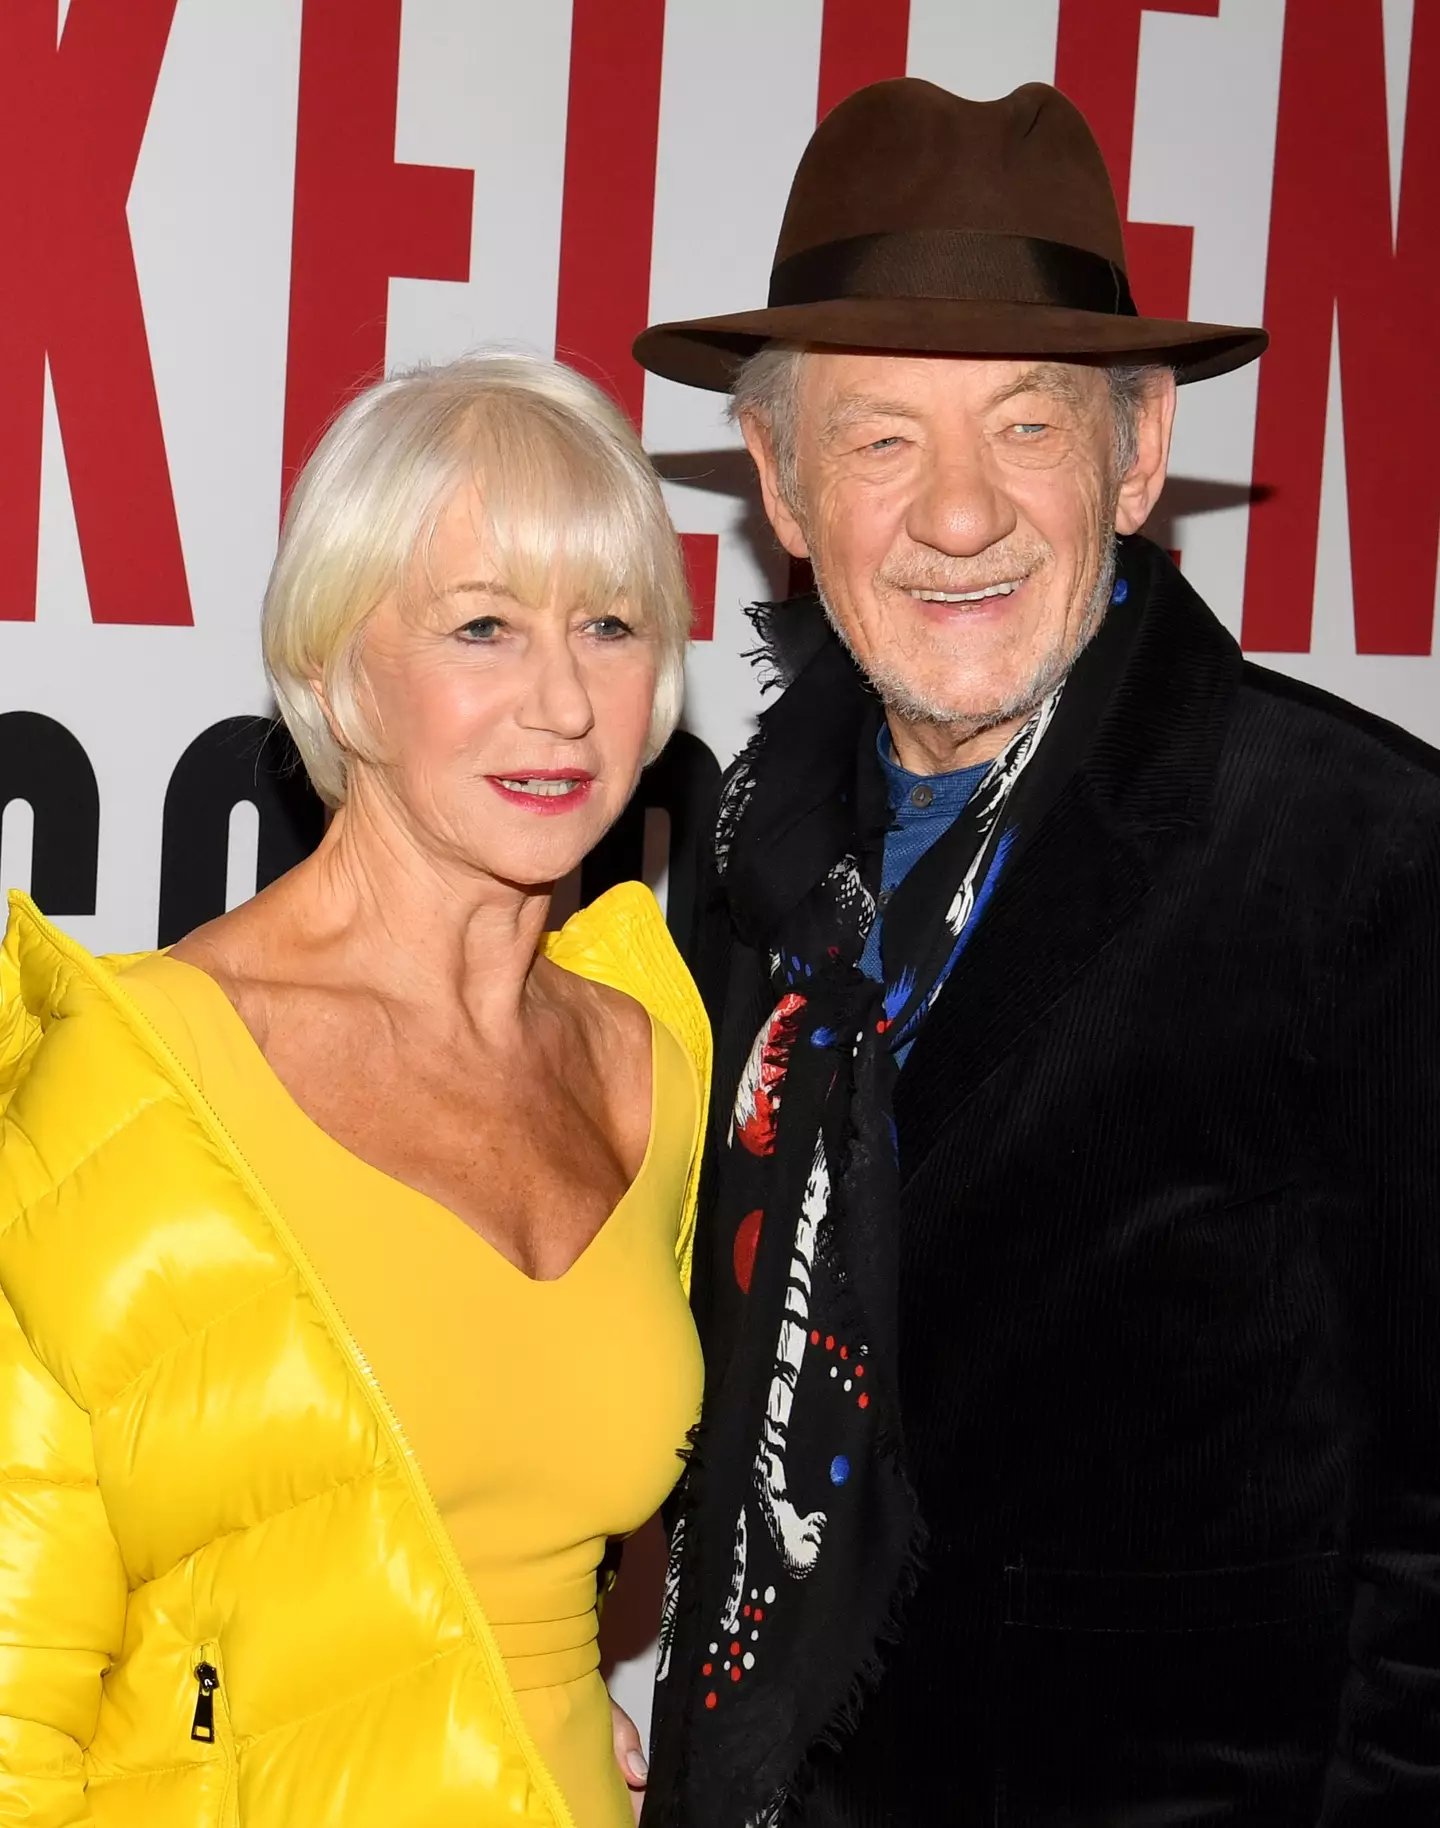 Sir Ian McKellen previously spoke about straight actors playing gay roles.